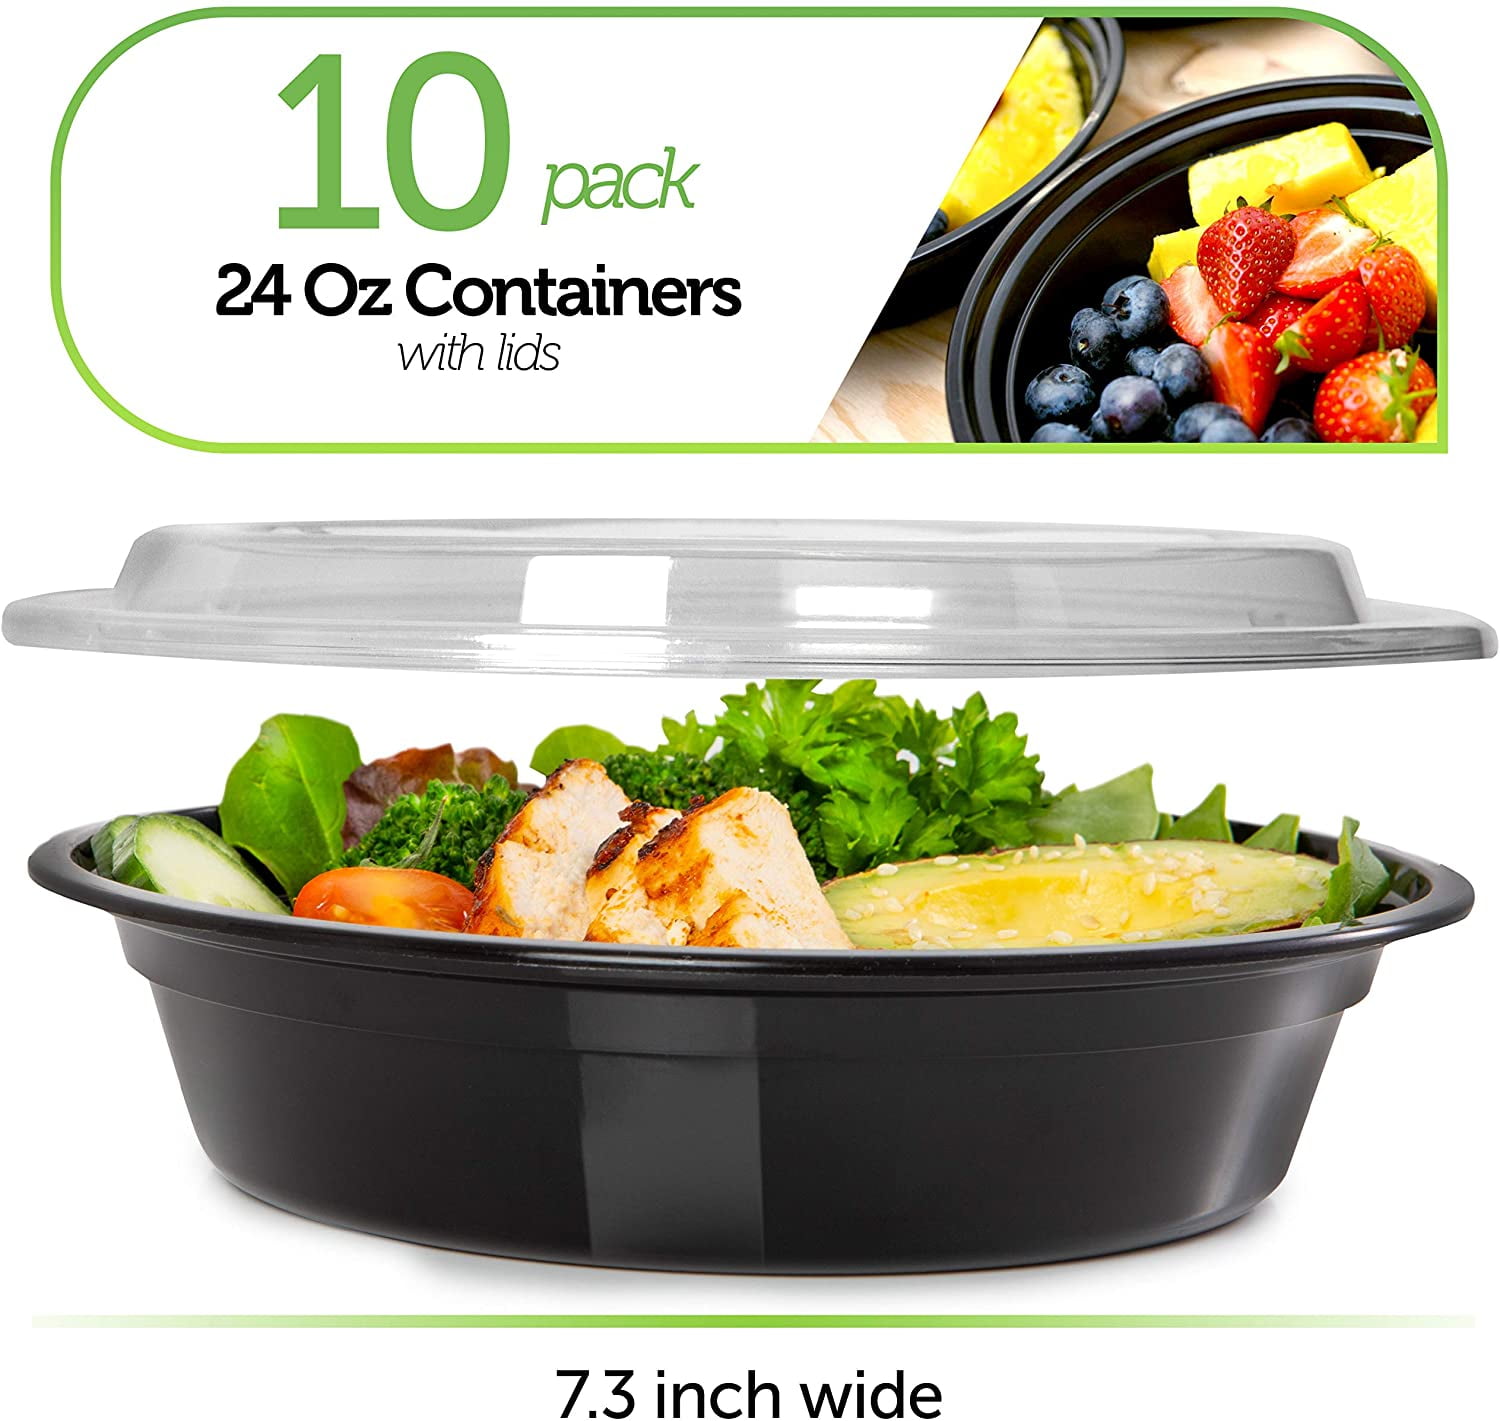 Prep Naturals - Food Storage Containers with Lids - Plastic Meal Prep Containers - 50 Pack, 25 Ounce, Clear